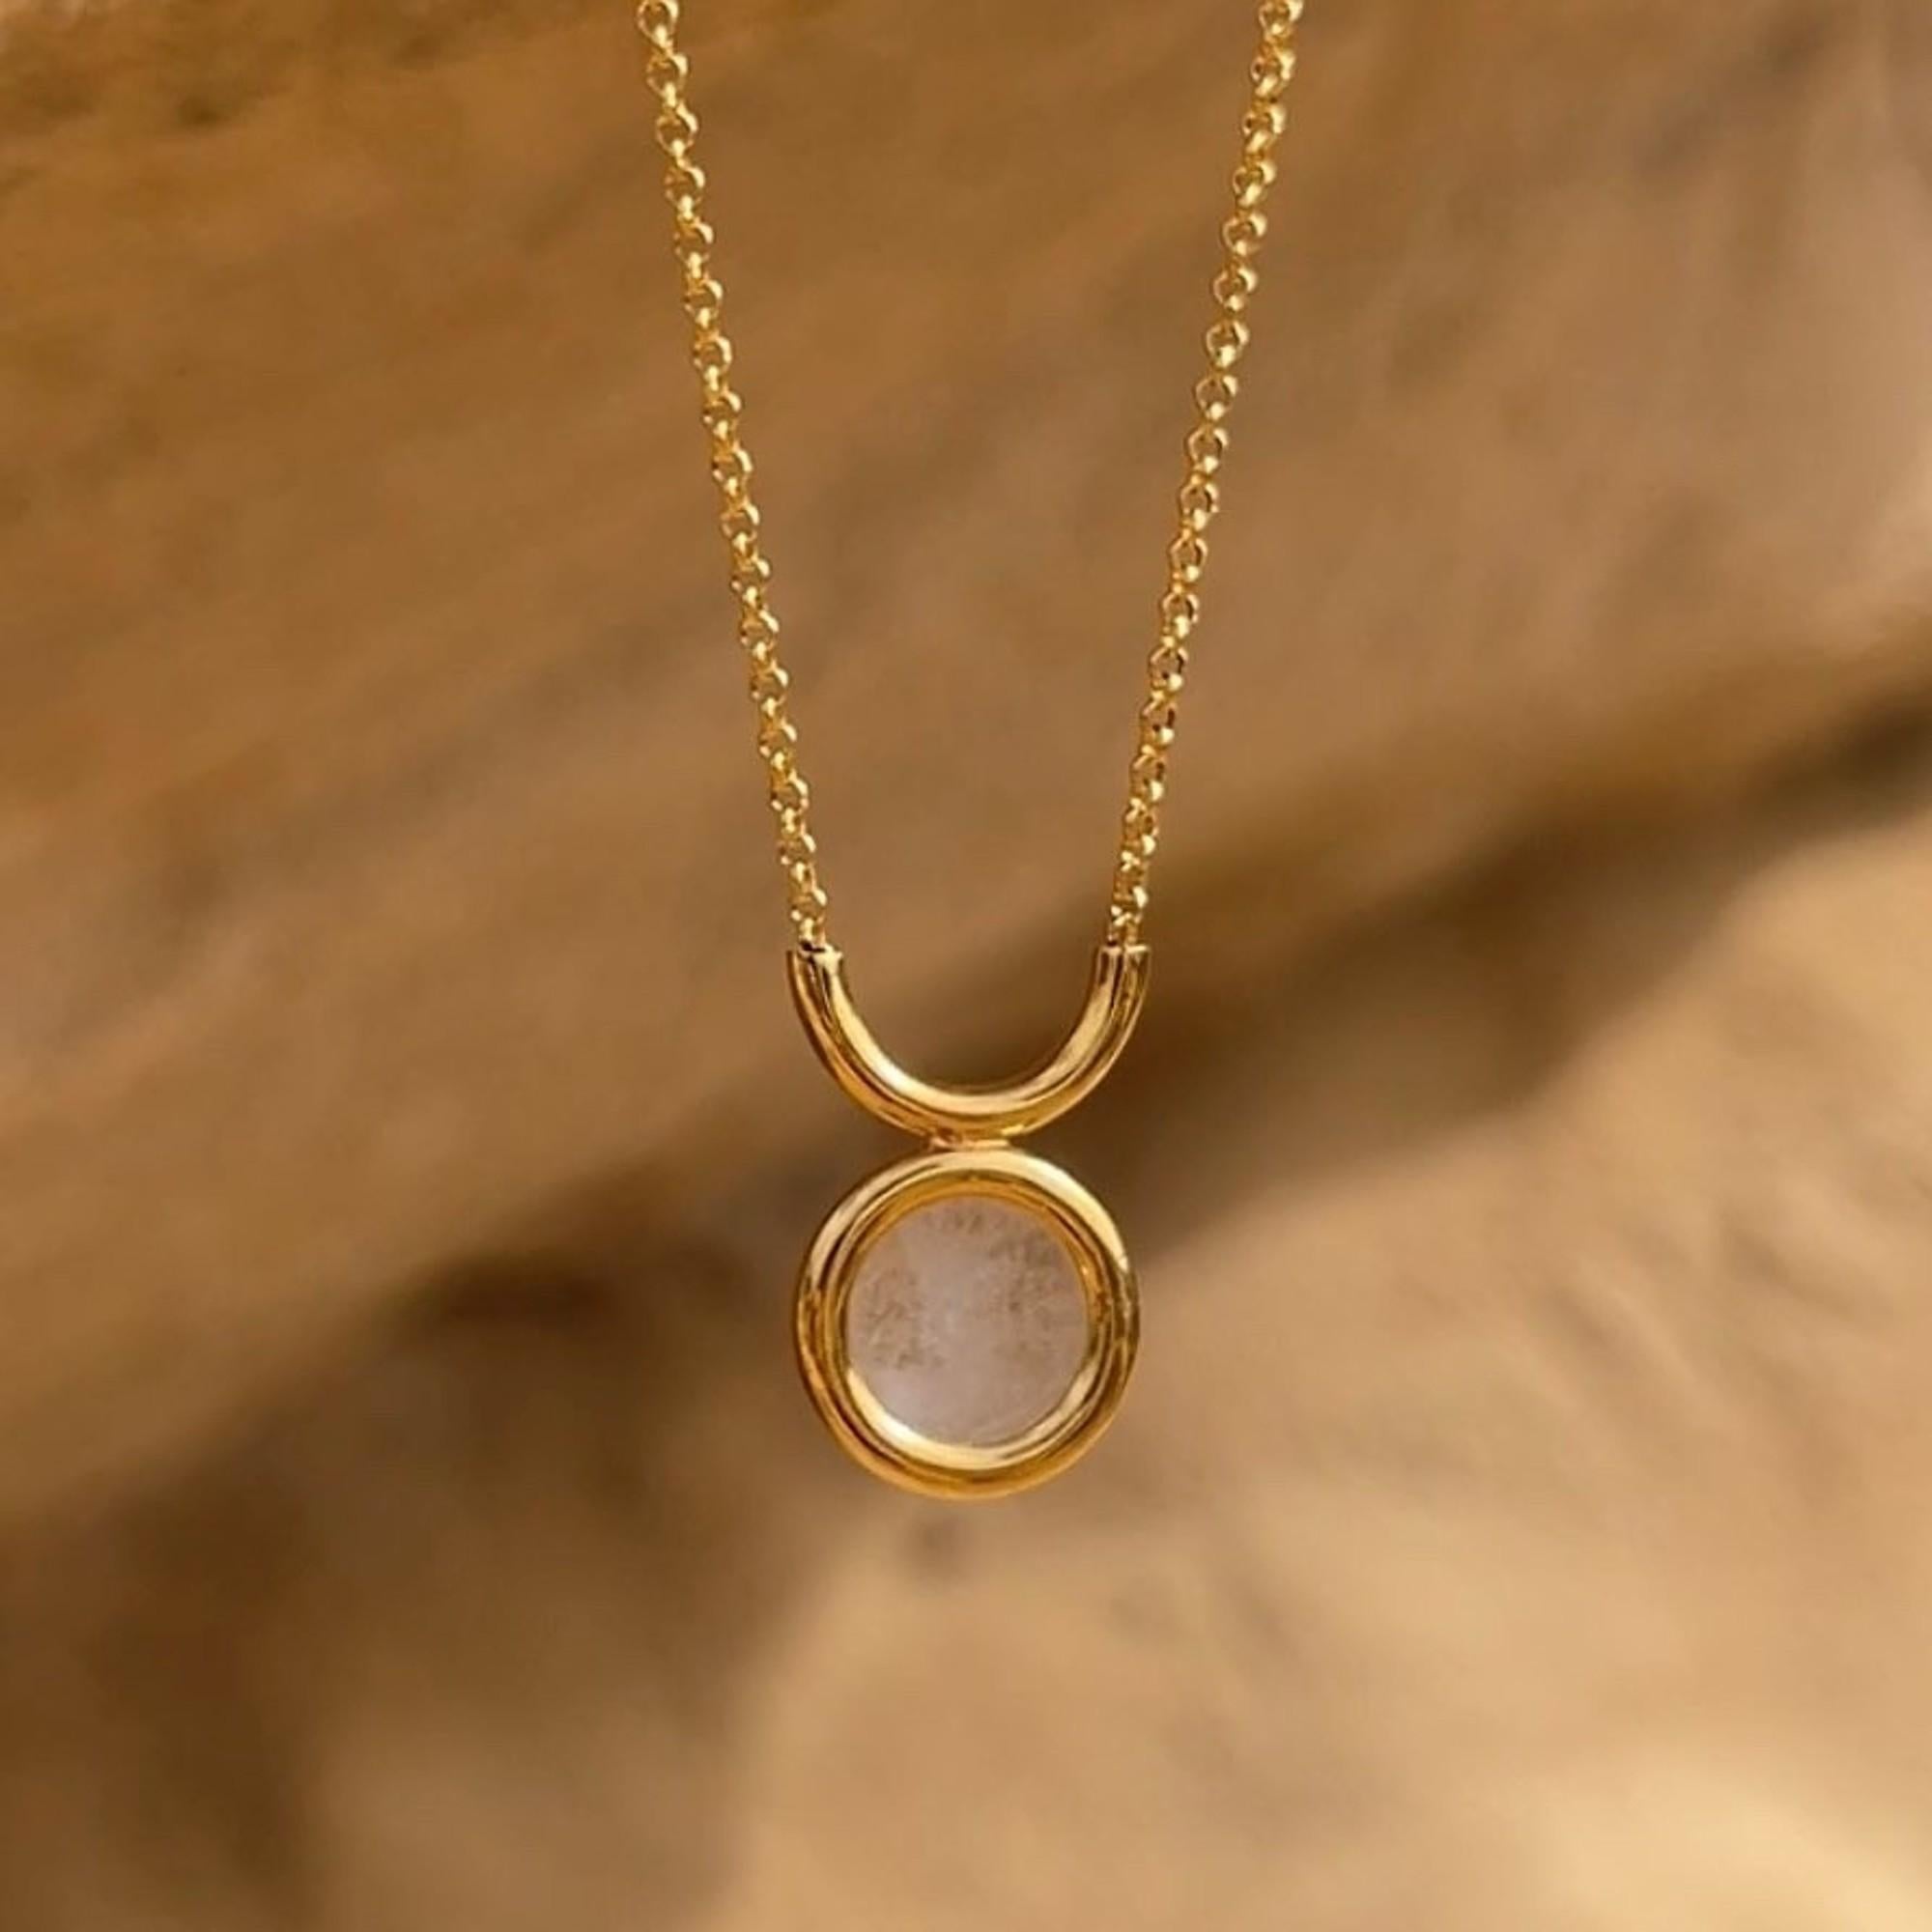 Our Tul necklace is the perfect choice if you love sublime simplicity. Pieces from Etru collection are not only beautiful accessories but also talismans. Mountain crystal will bring you positive energy and harmony.
The name of the necklace comes